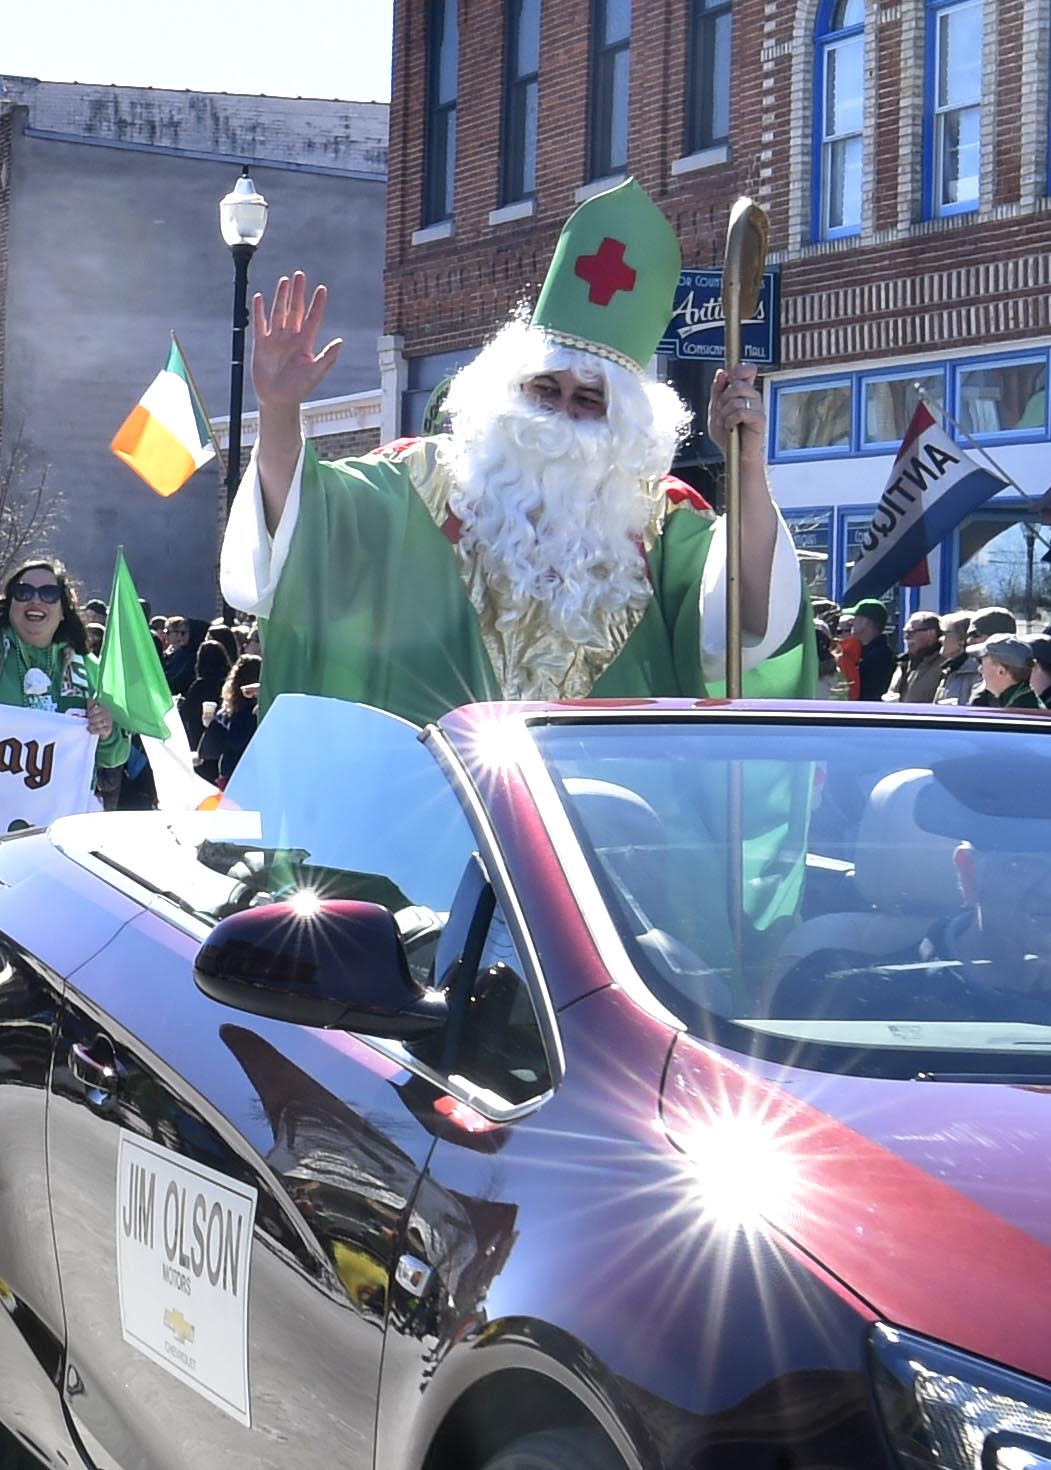 St. Patrick (played here by Scott Dequaine of Sturgeon Bay) makes an appearance at  a past St. Patrick's Day Parade in Sturgeon Bay. This year's parade, the 30th annual, takes place March 11.